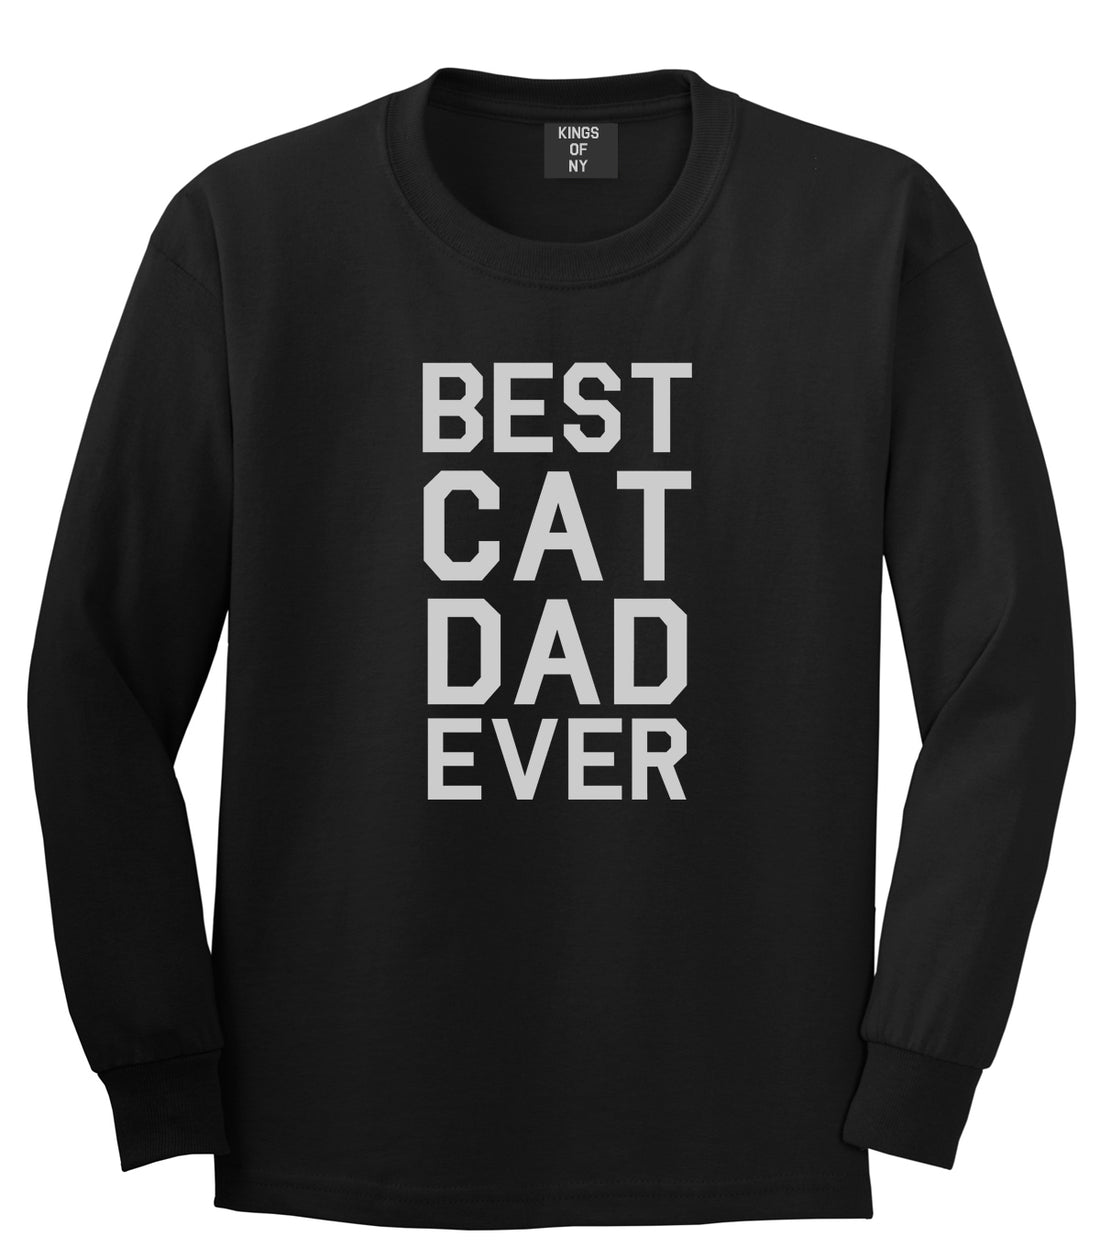 Best Cat Dad Ever Mens Black Long Sleeve T-Shirt by Kings Of NY